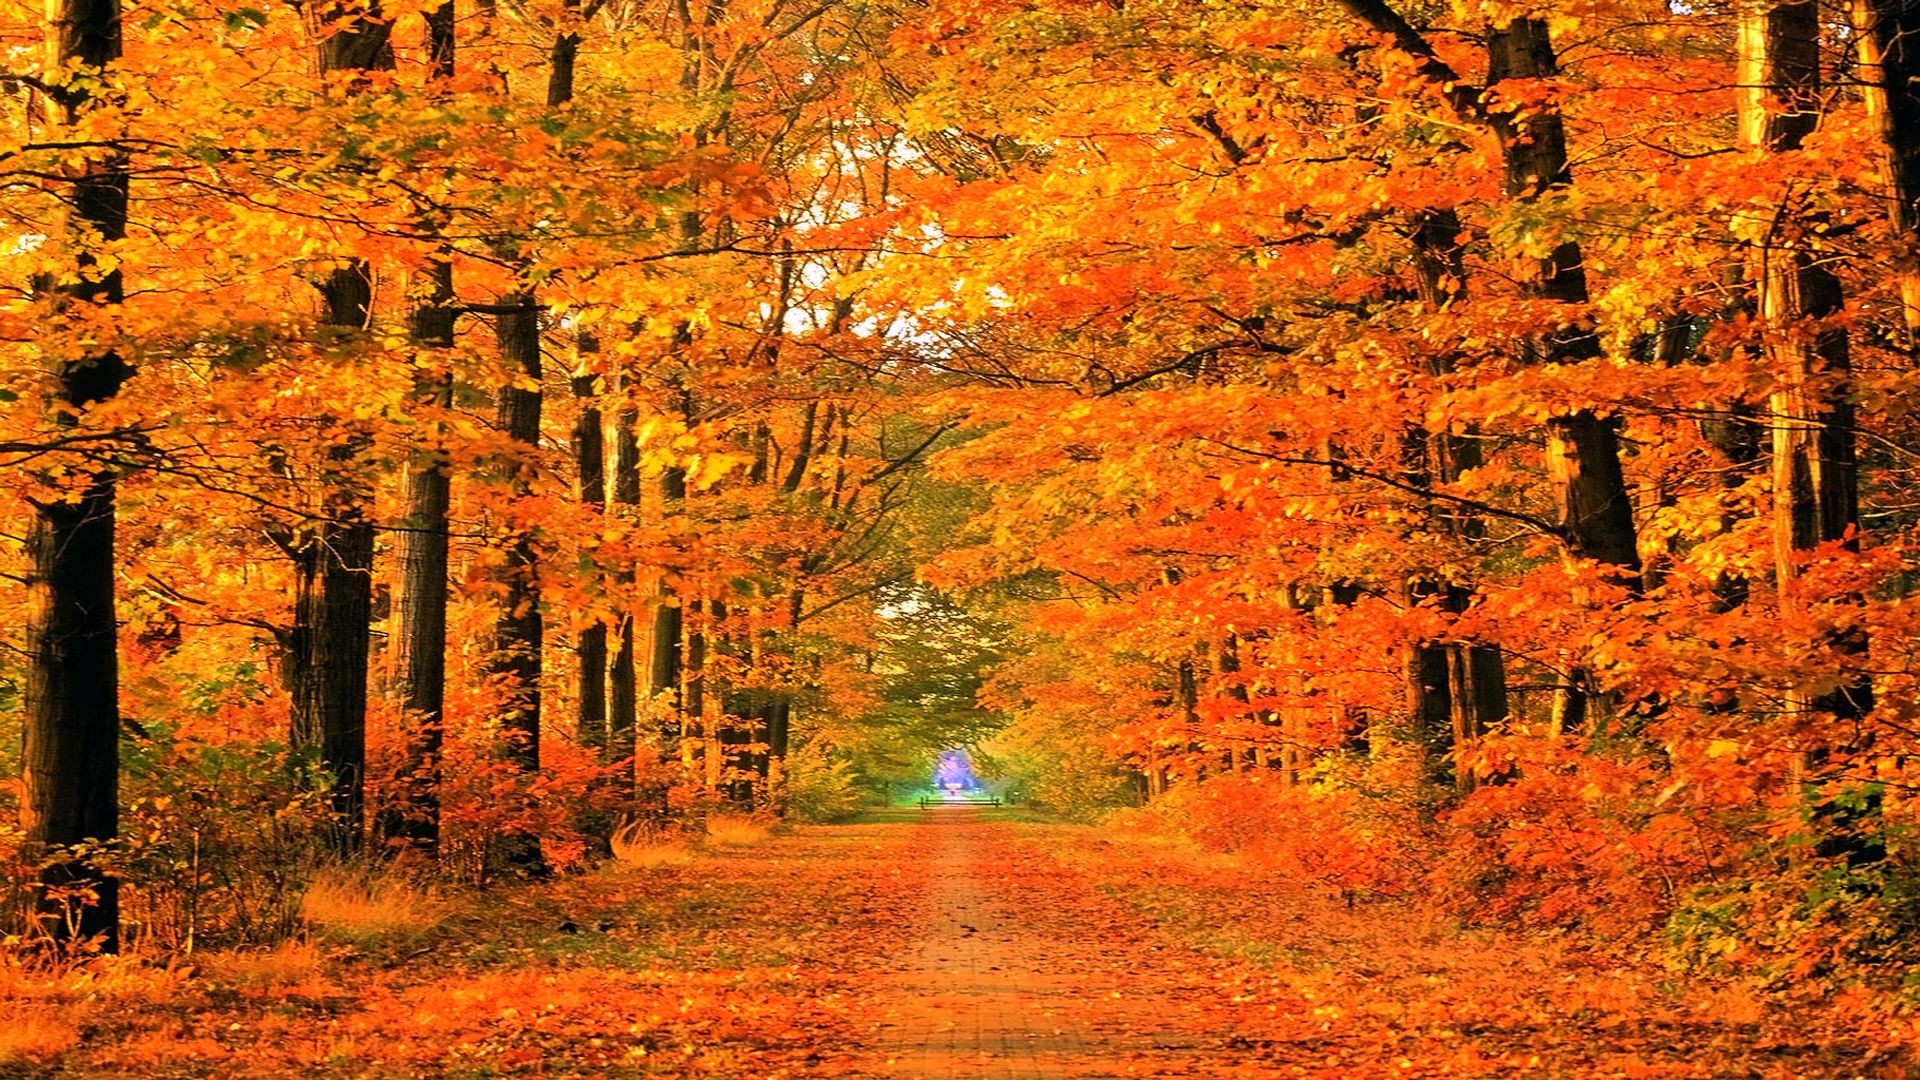 The Autumn Wallpapers Here Are All About Colorful Leaves, - Fall Computer Backgrounds - HD Wallpaper 